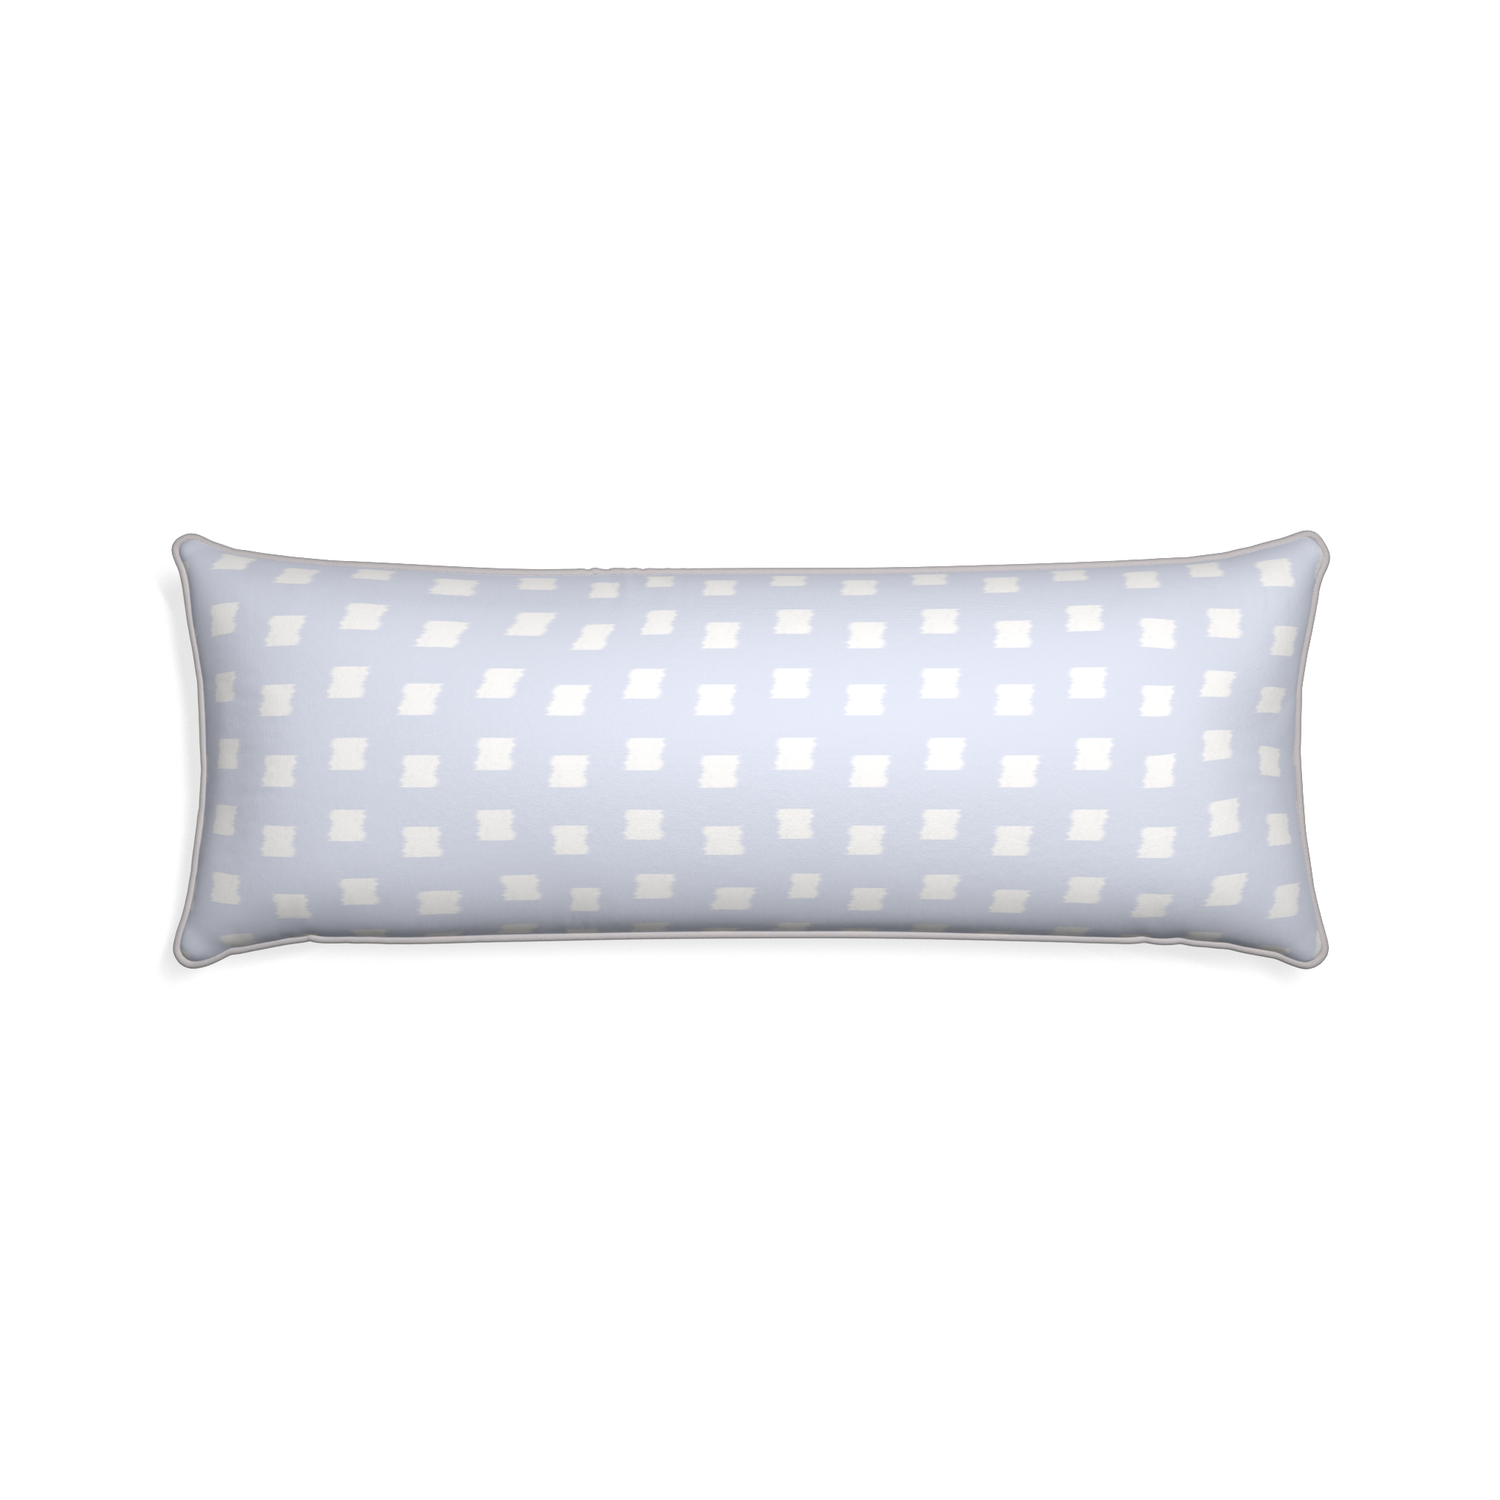 Xl-lumbar denton custom sky blue patternpillow with pebble piping on white background